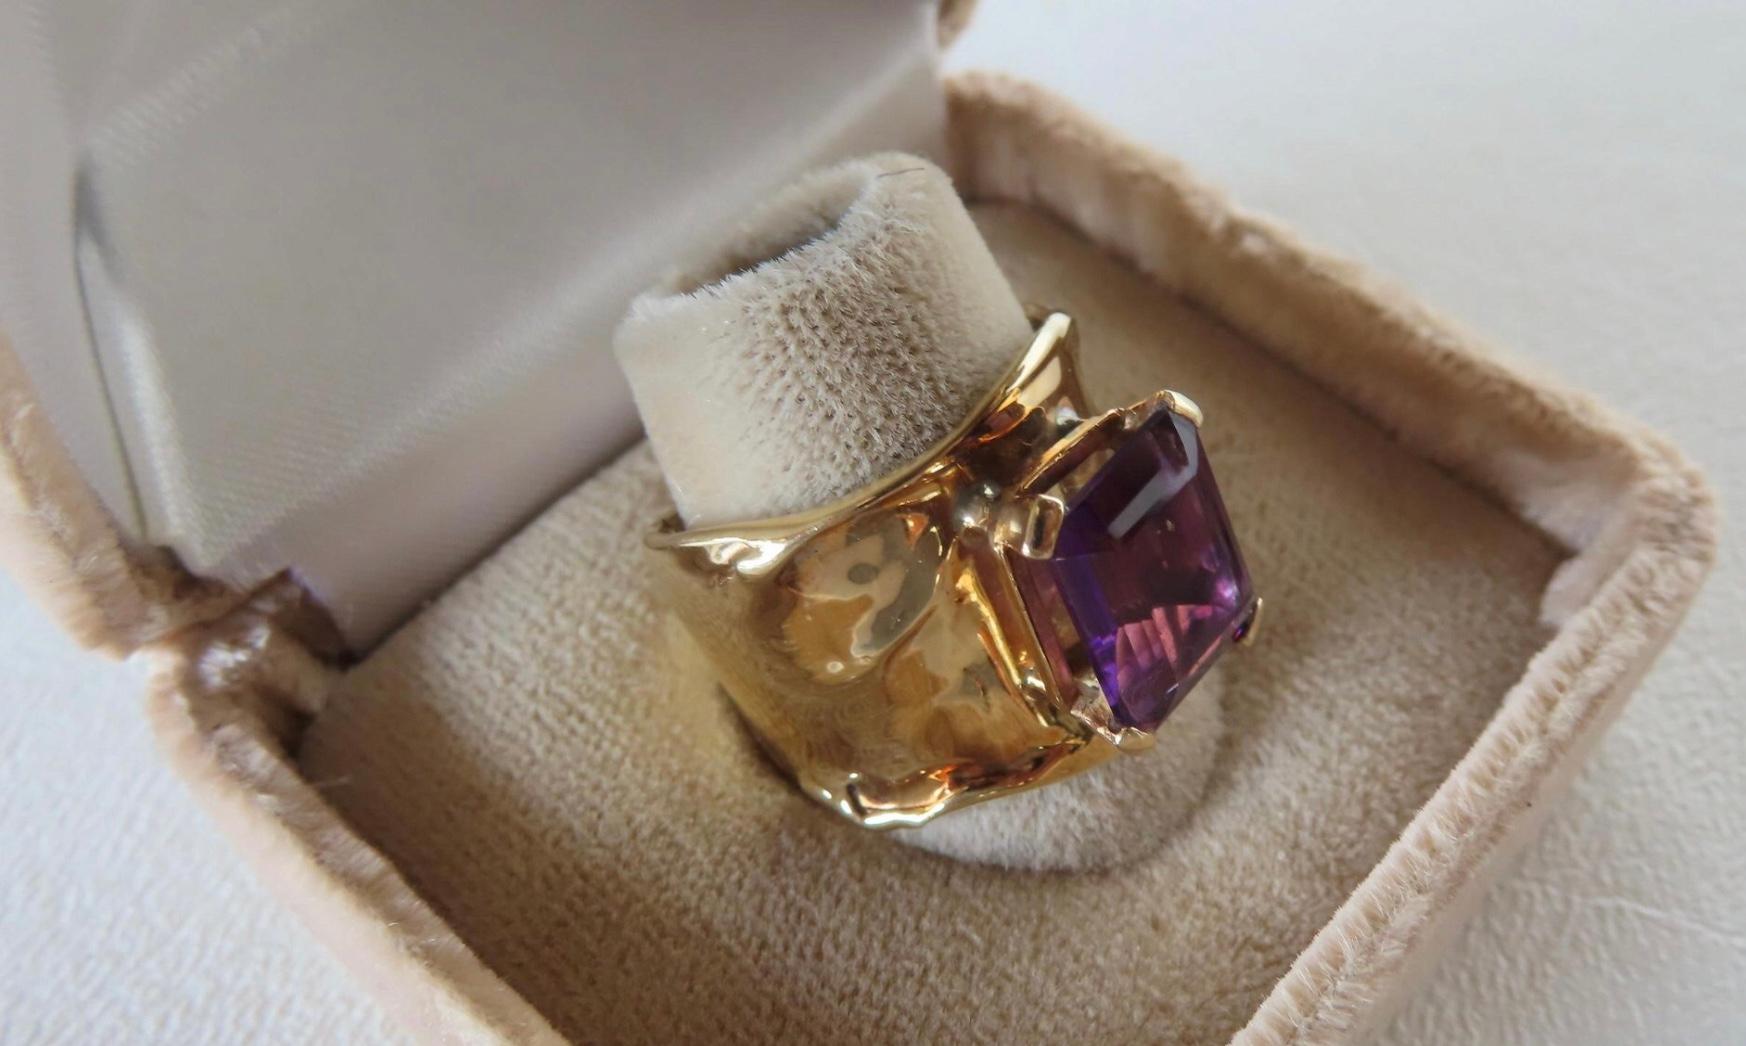 Jim Cotter 14K Gold Wide Band With Emerald-cut Amethyst Ring. 9 grams total weight. Very good condition.